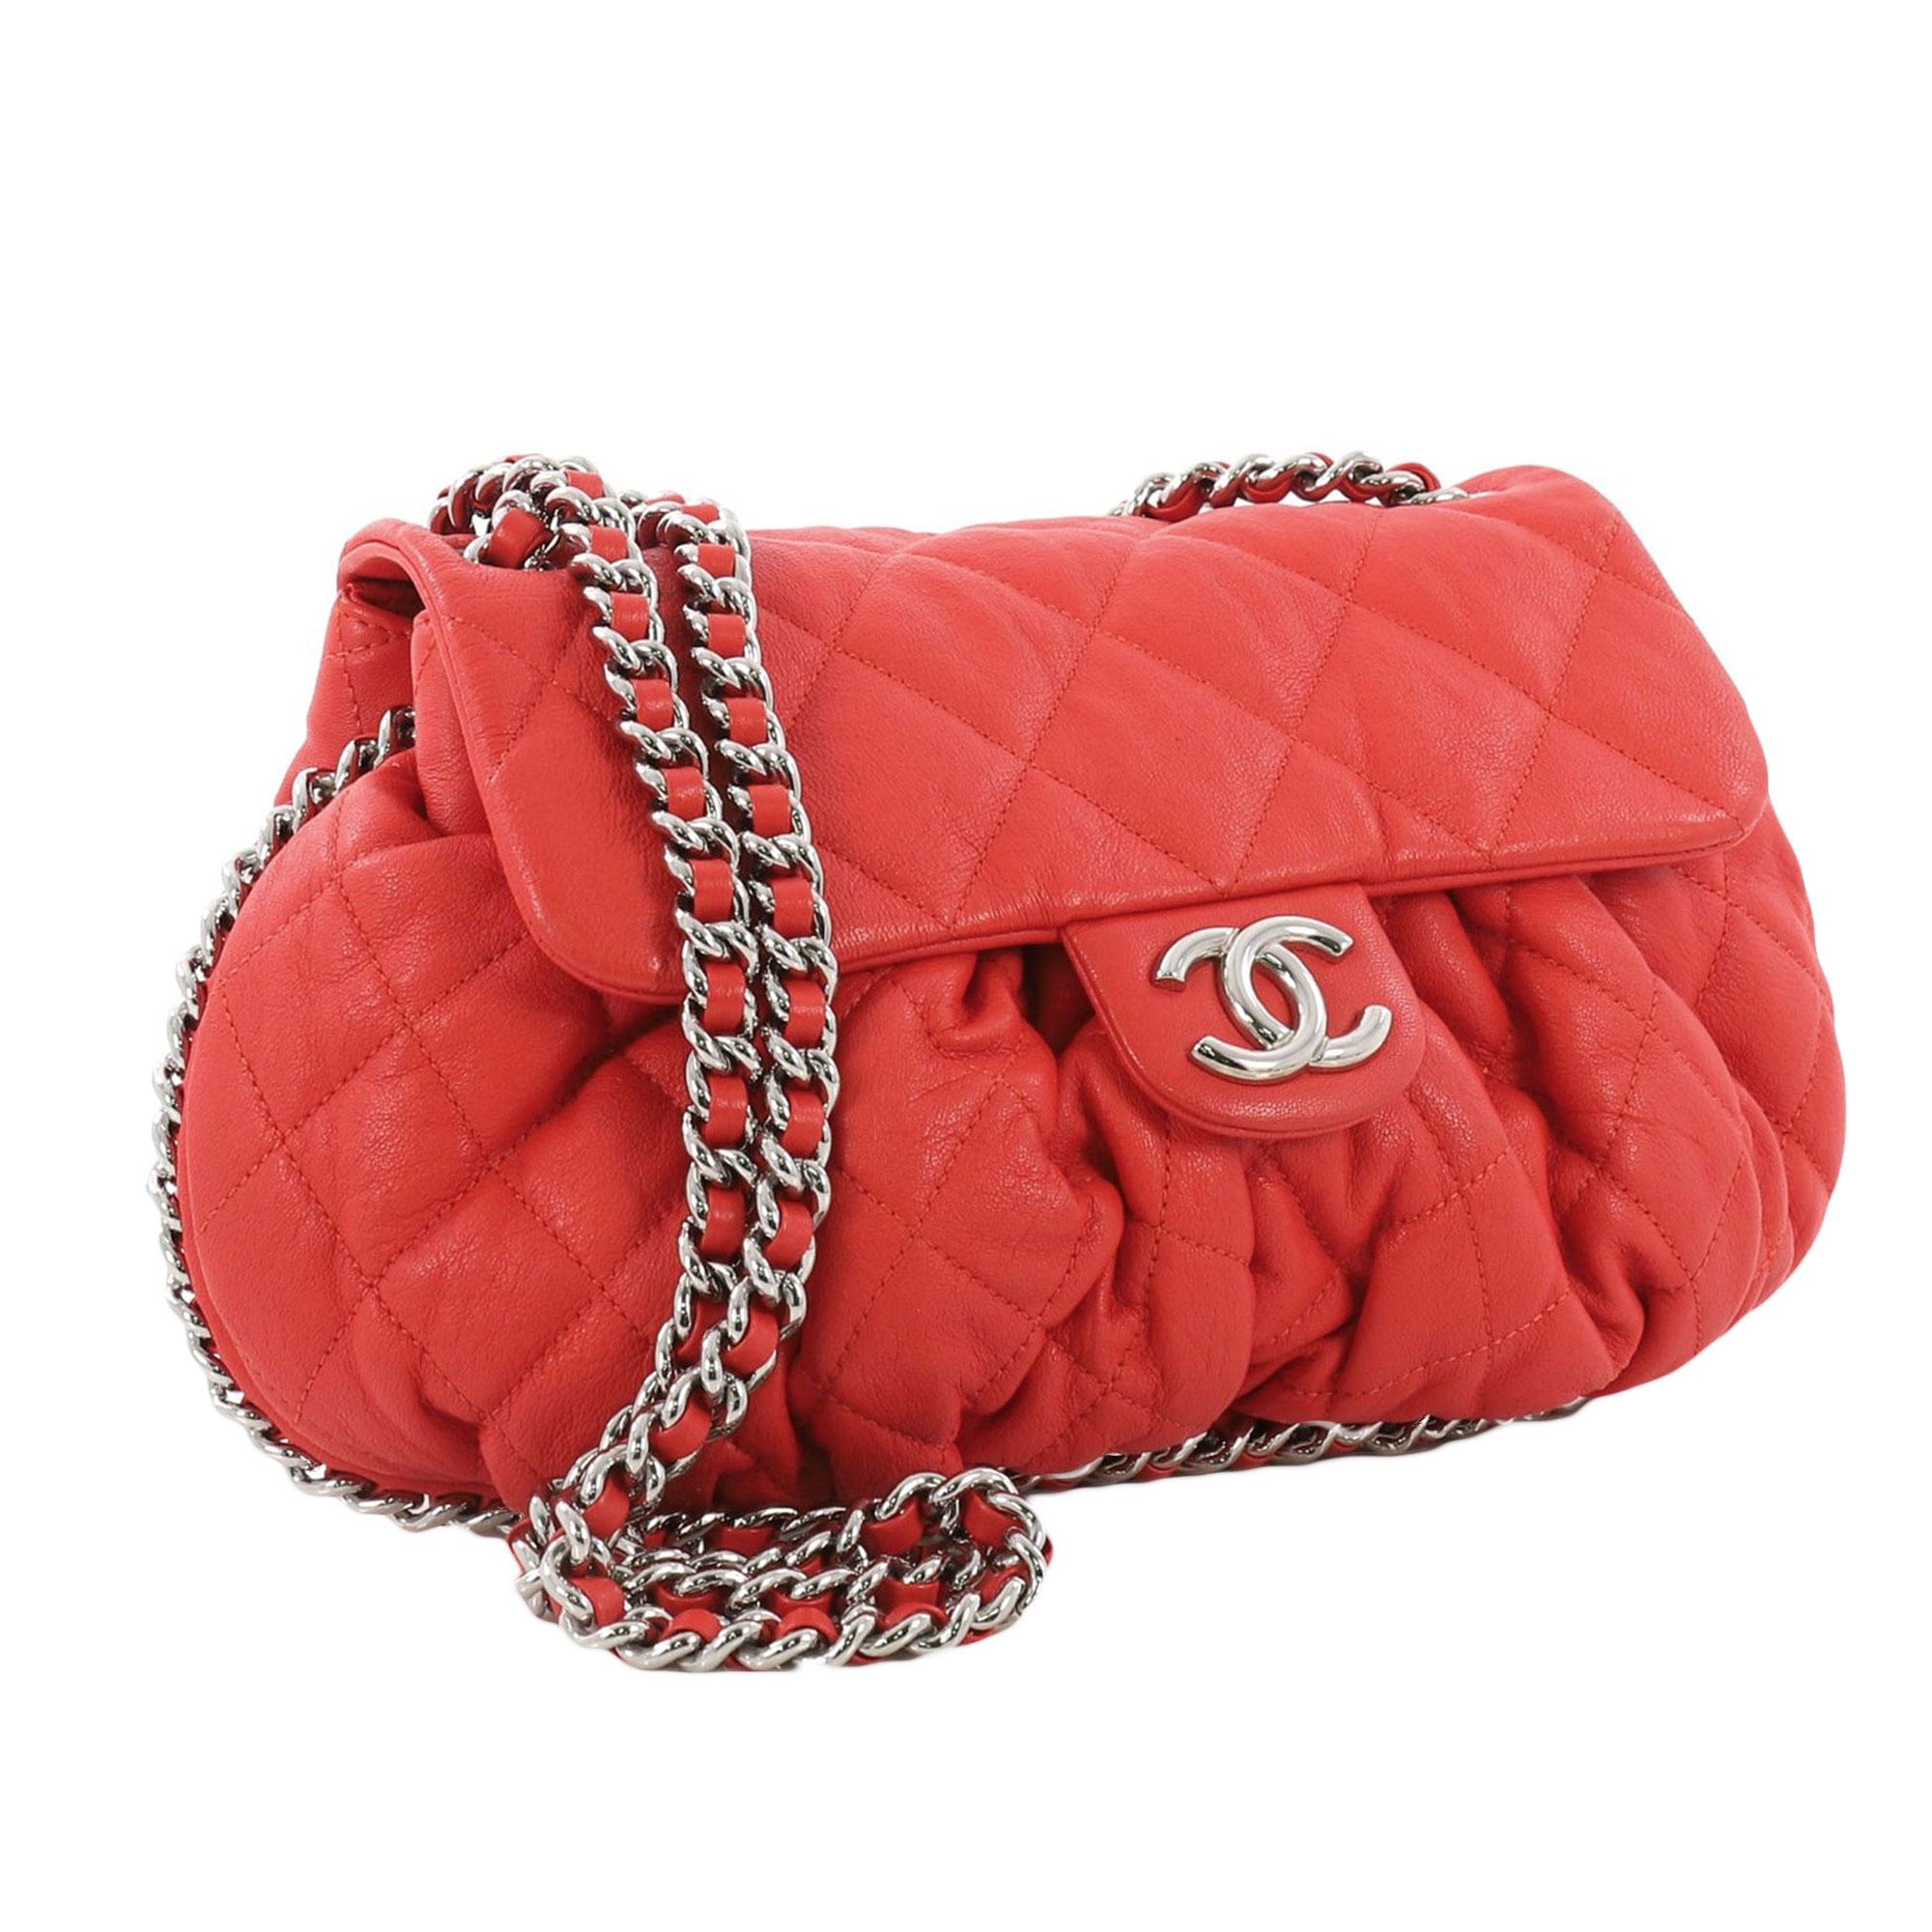 Chanel Red Coral Large Chain Around Limited Edition Classic Flap Bag 

Condition: Pristine.  Comes with dust bag, authenticity hologram, matching authenticity card, and Chanel mini paperwork.

Same size and model as seen on Kim Kardashian in black.